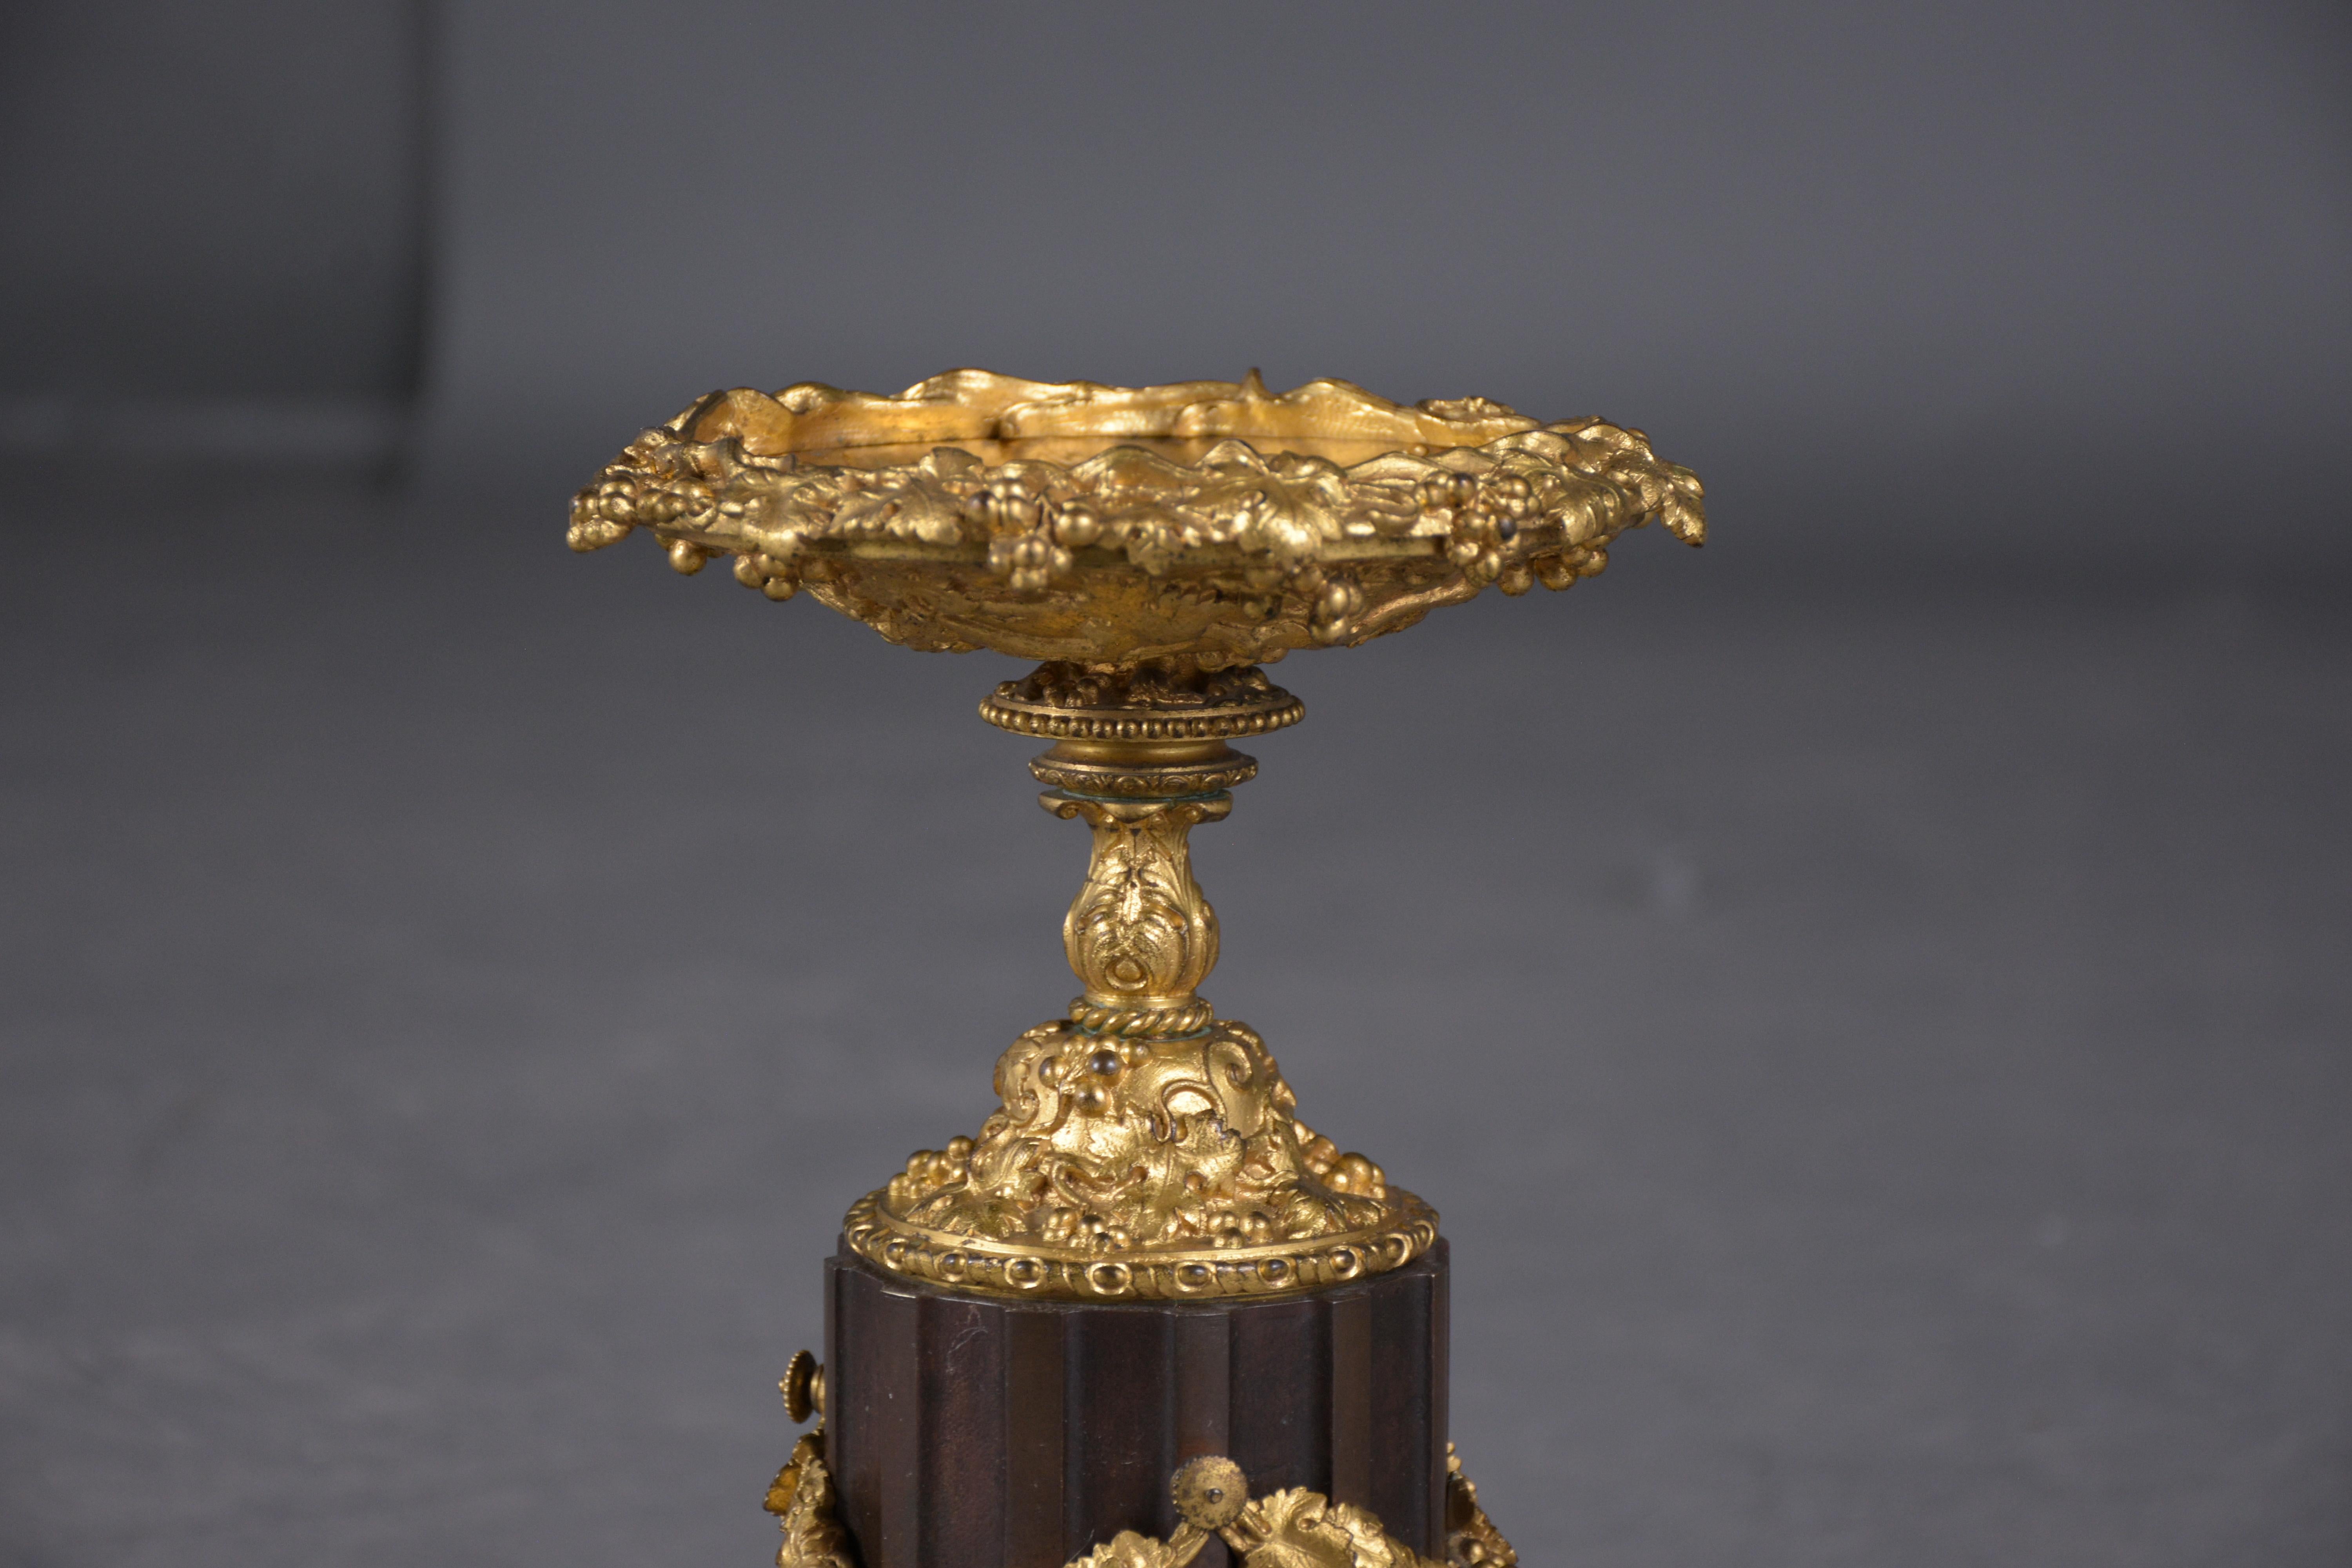 Elegant 19th-Century French Bronzed Urns with Gold Ormolu Details 2